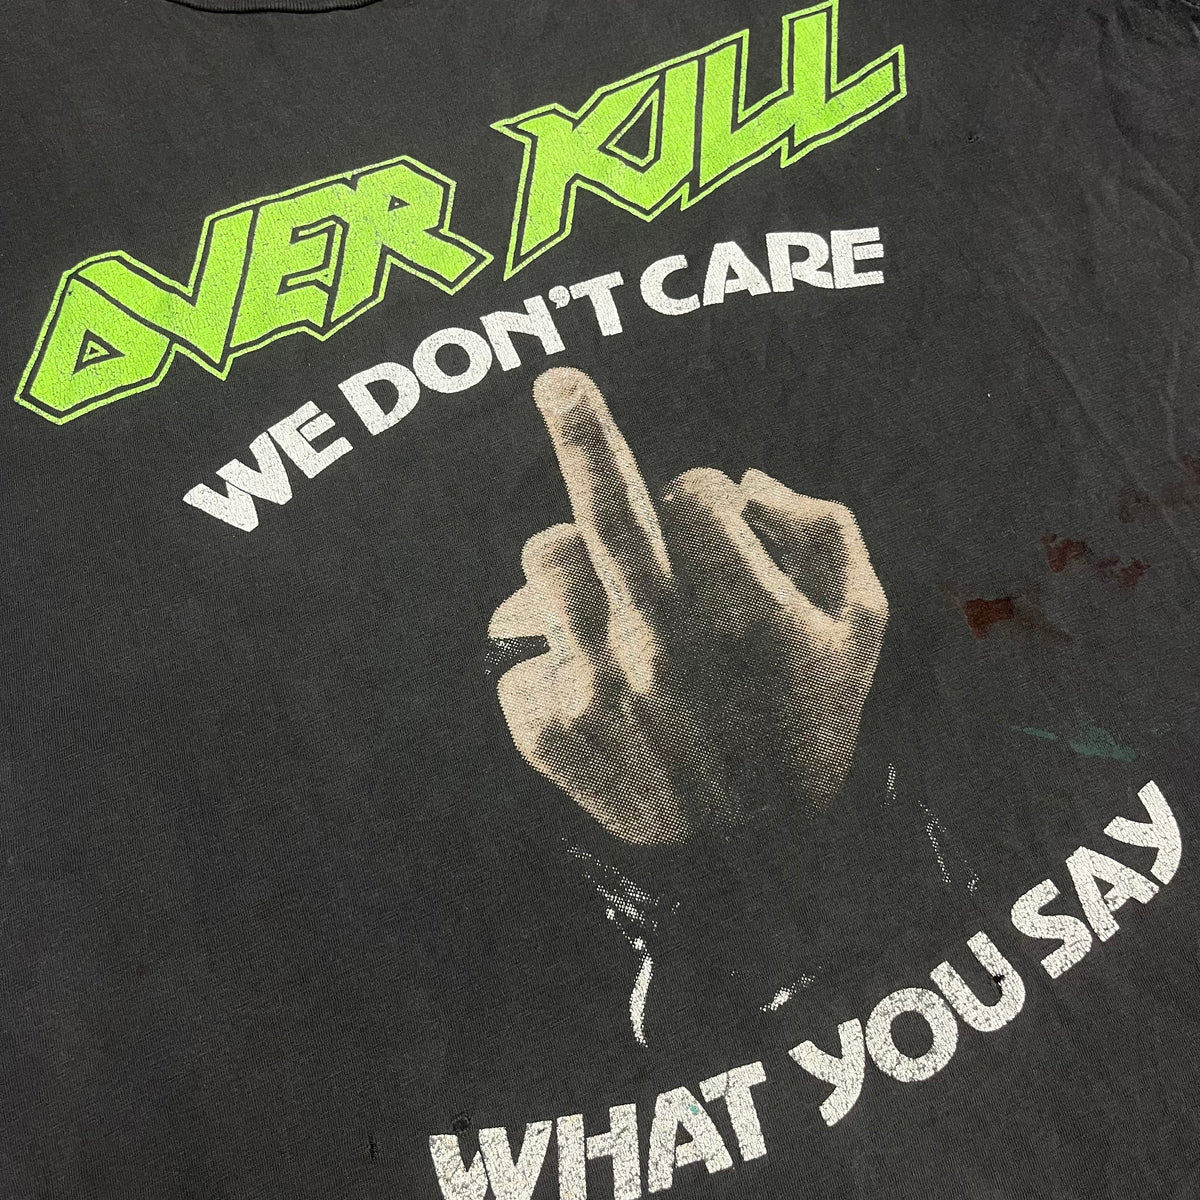 Vintage Overkill &quot;Christmas On Speed&quot; We Don&#39;t Care T-Shirt